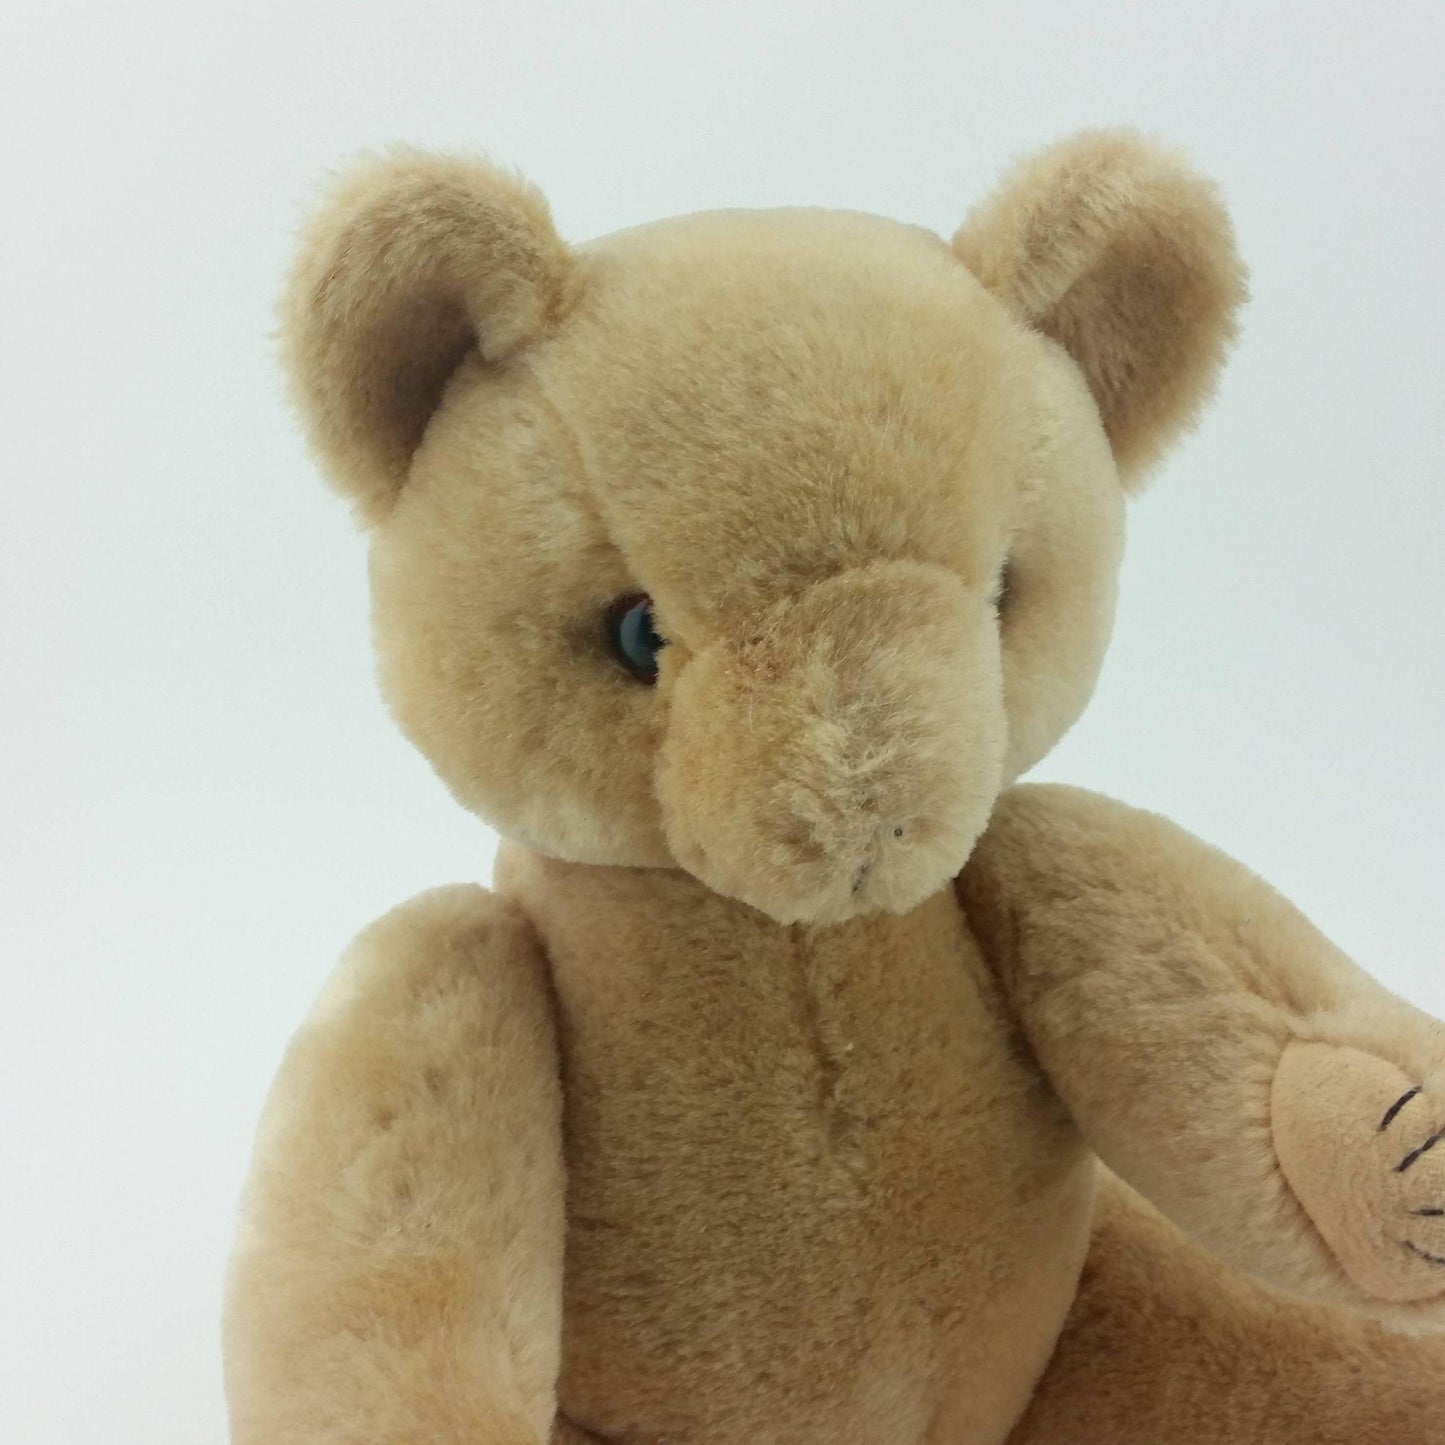 Shanghai Doll Factory Jointed Teddy Bear SDF Wool Natural Honey Tan Colored